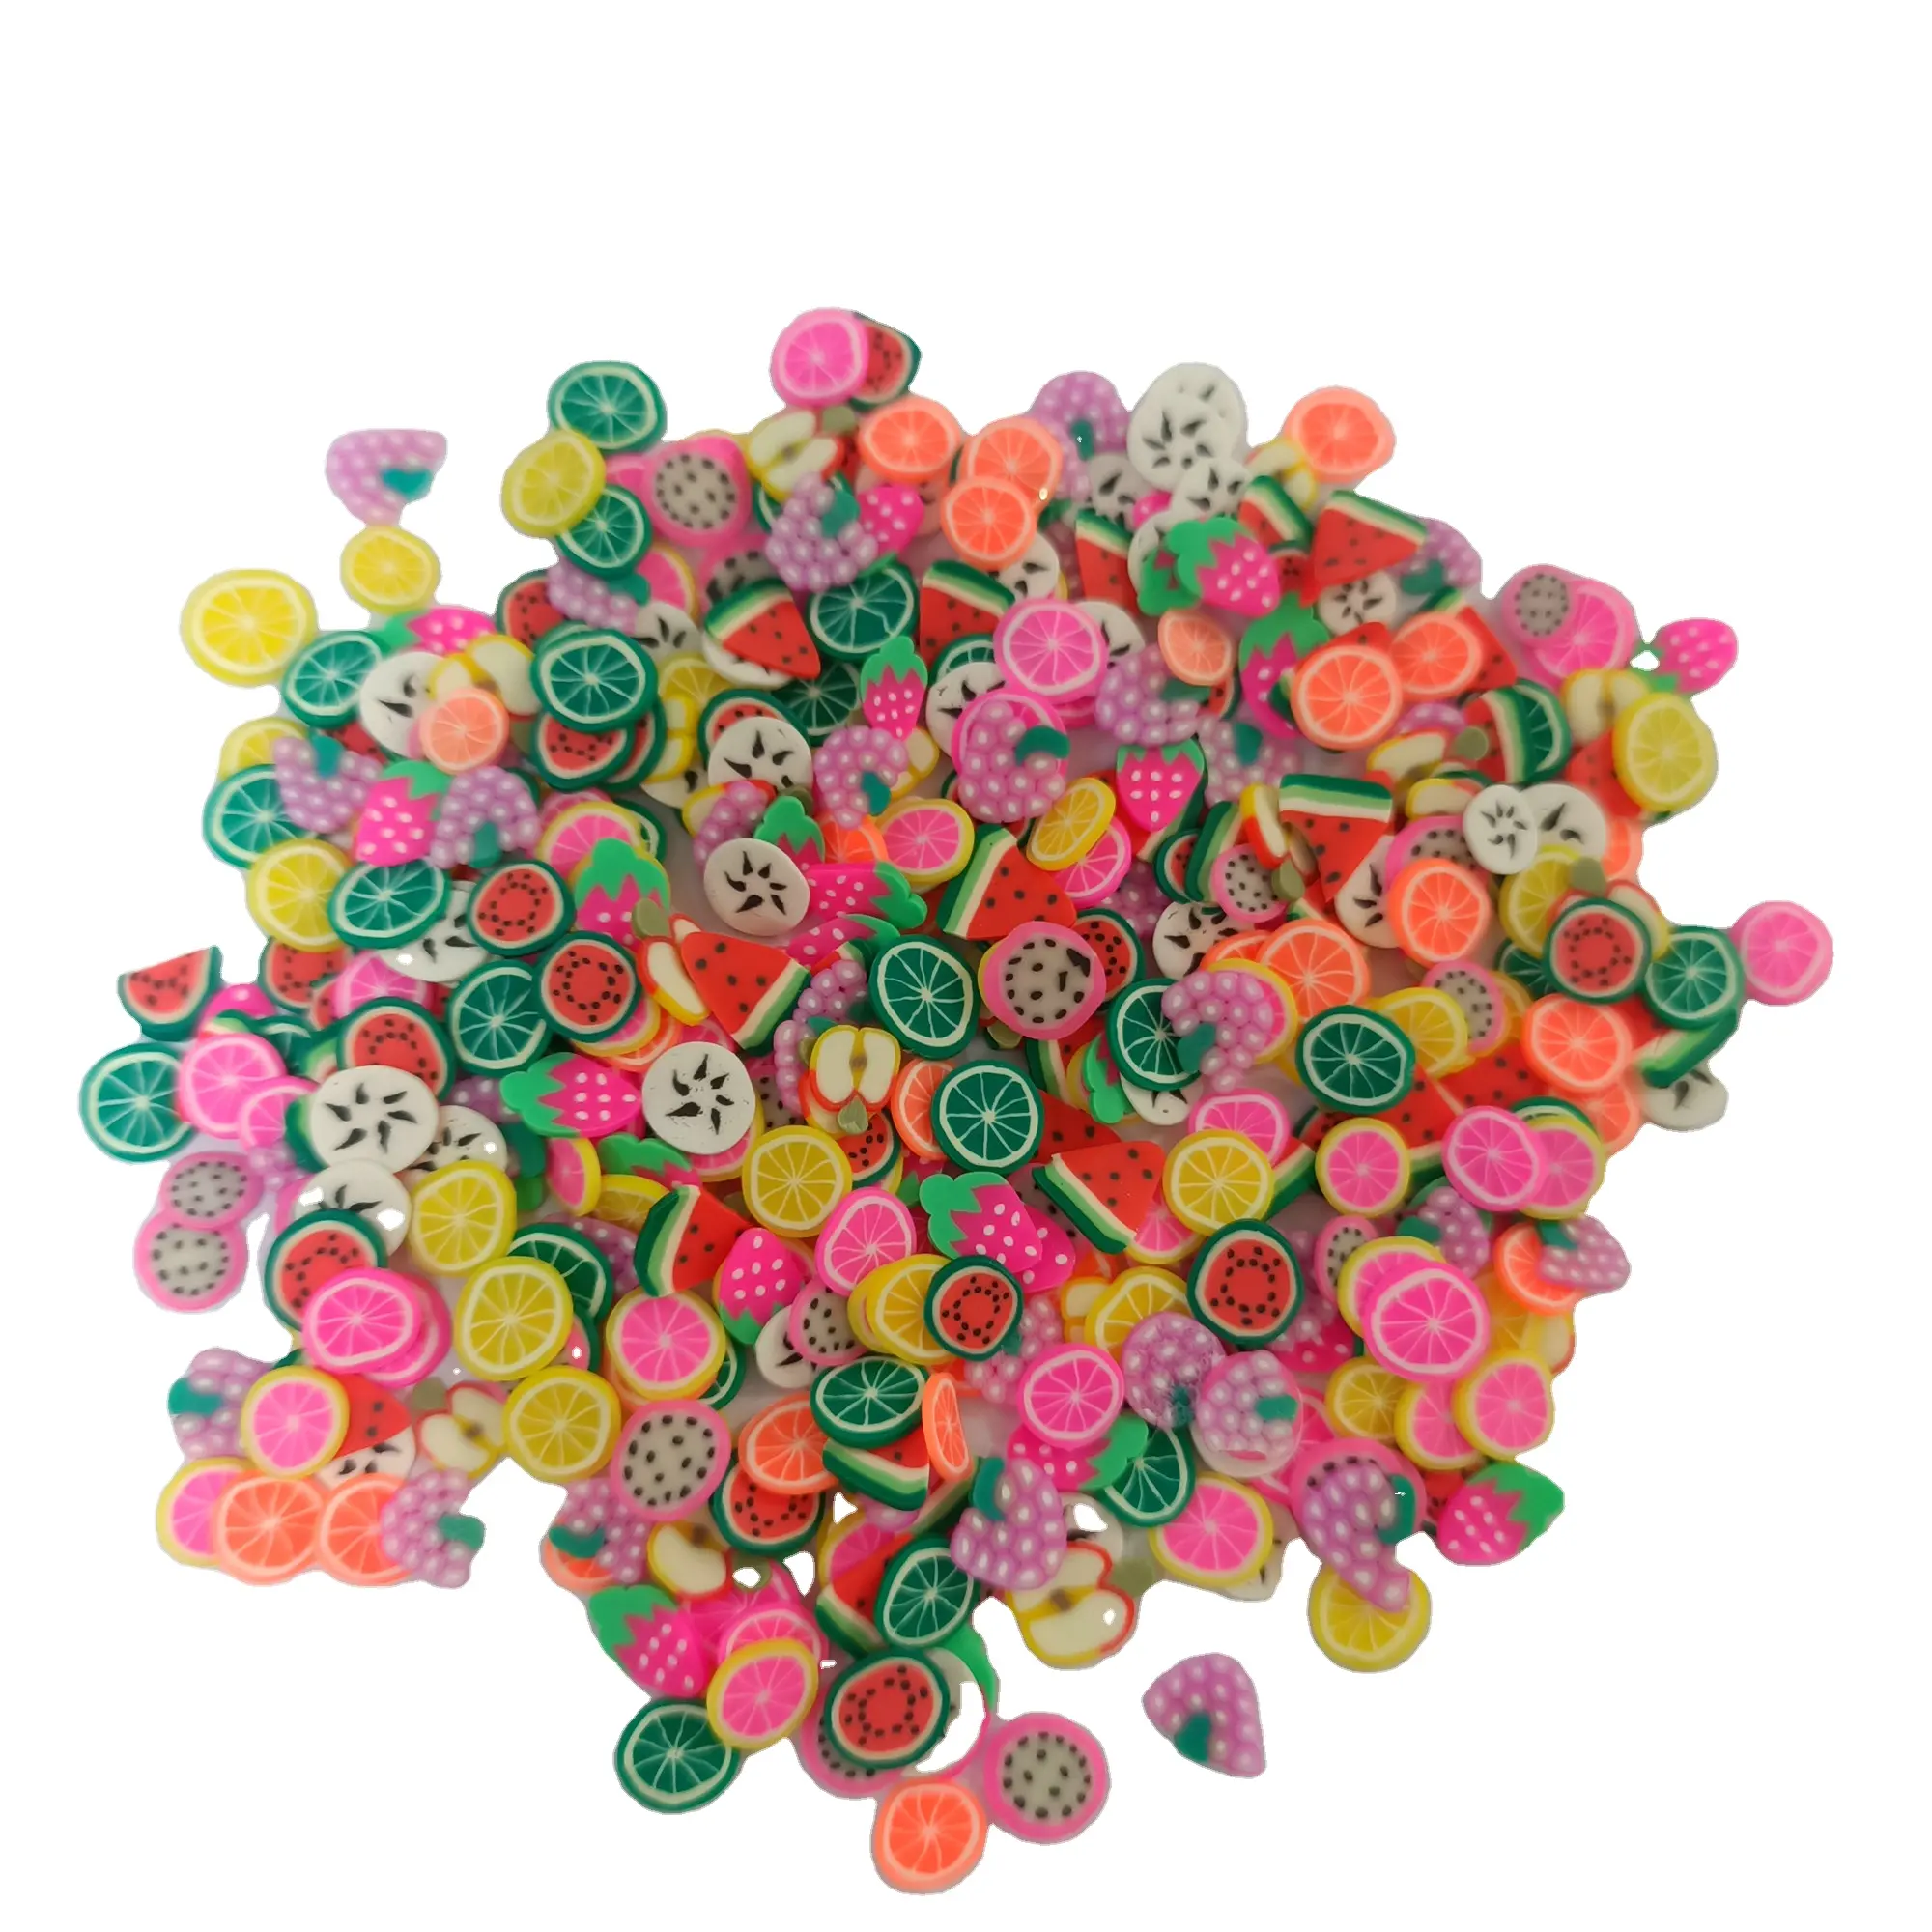 Clay Confetti Soft PVC Candy Fruit shapes multi sequins for Slime & crafts decoration